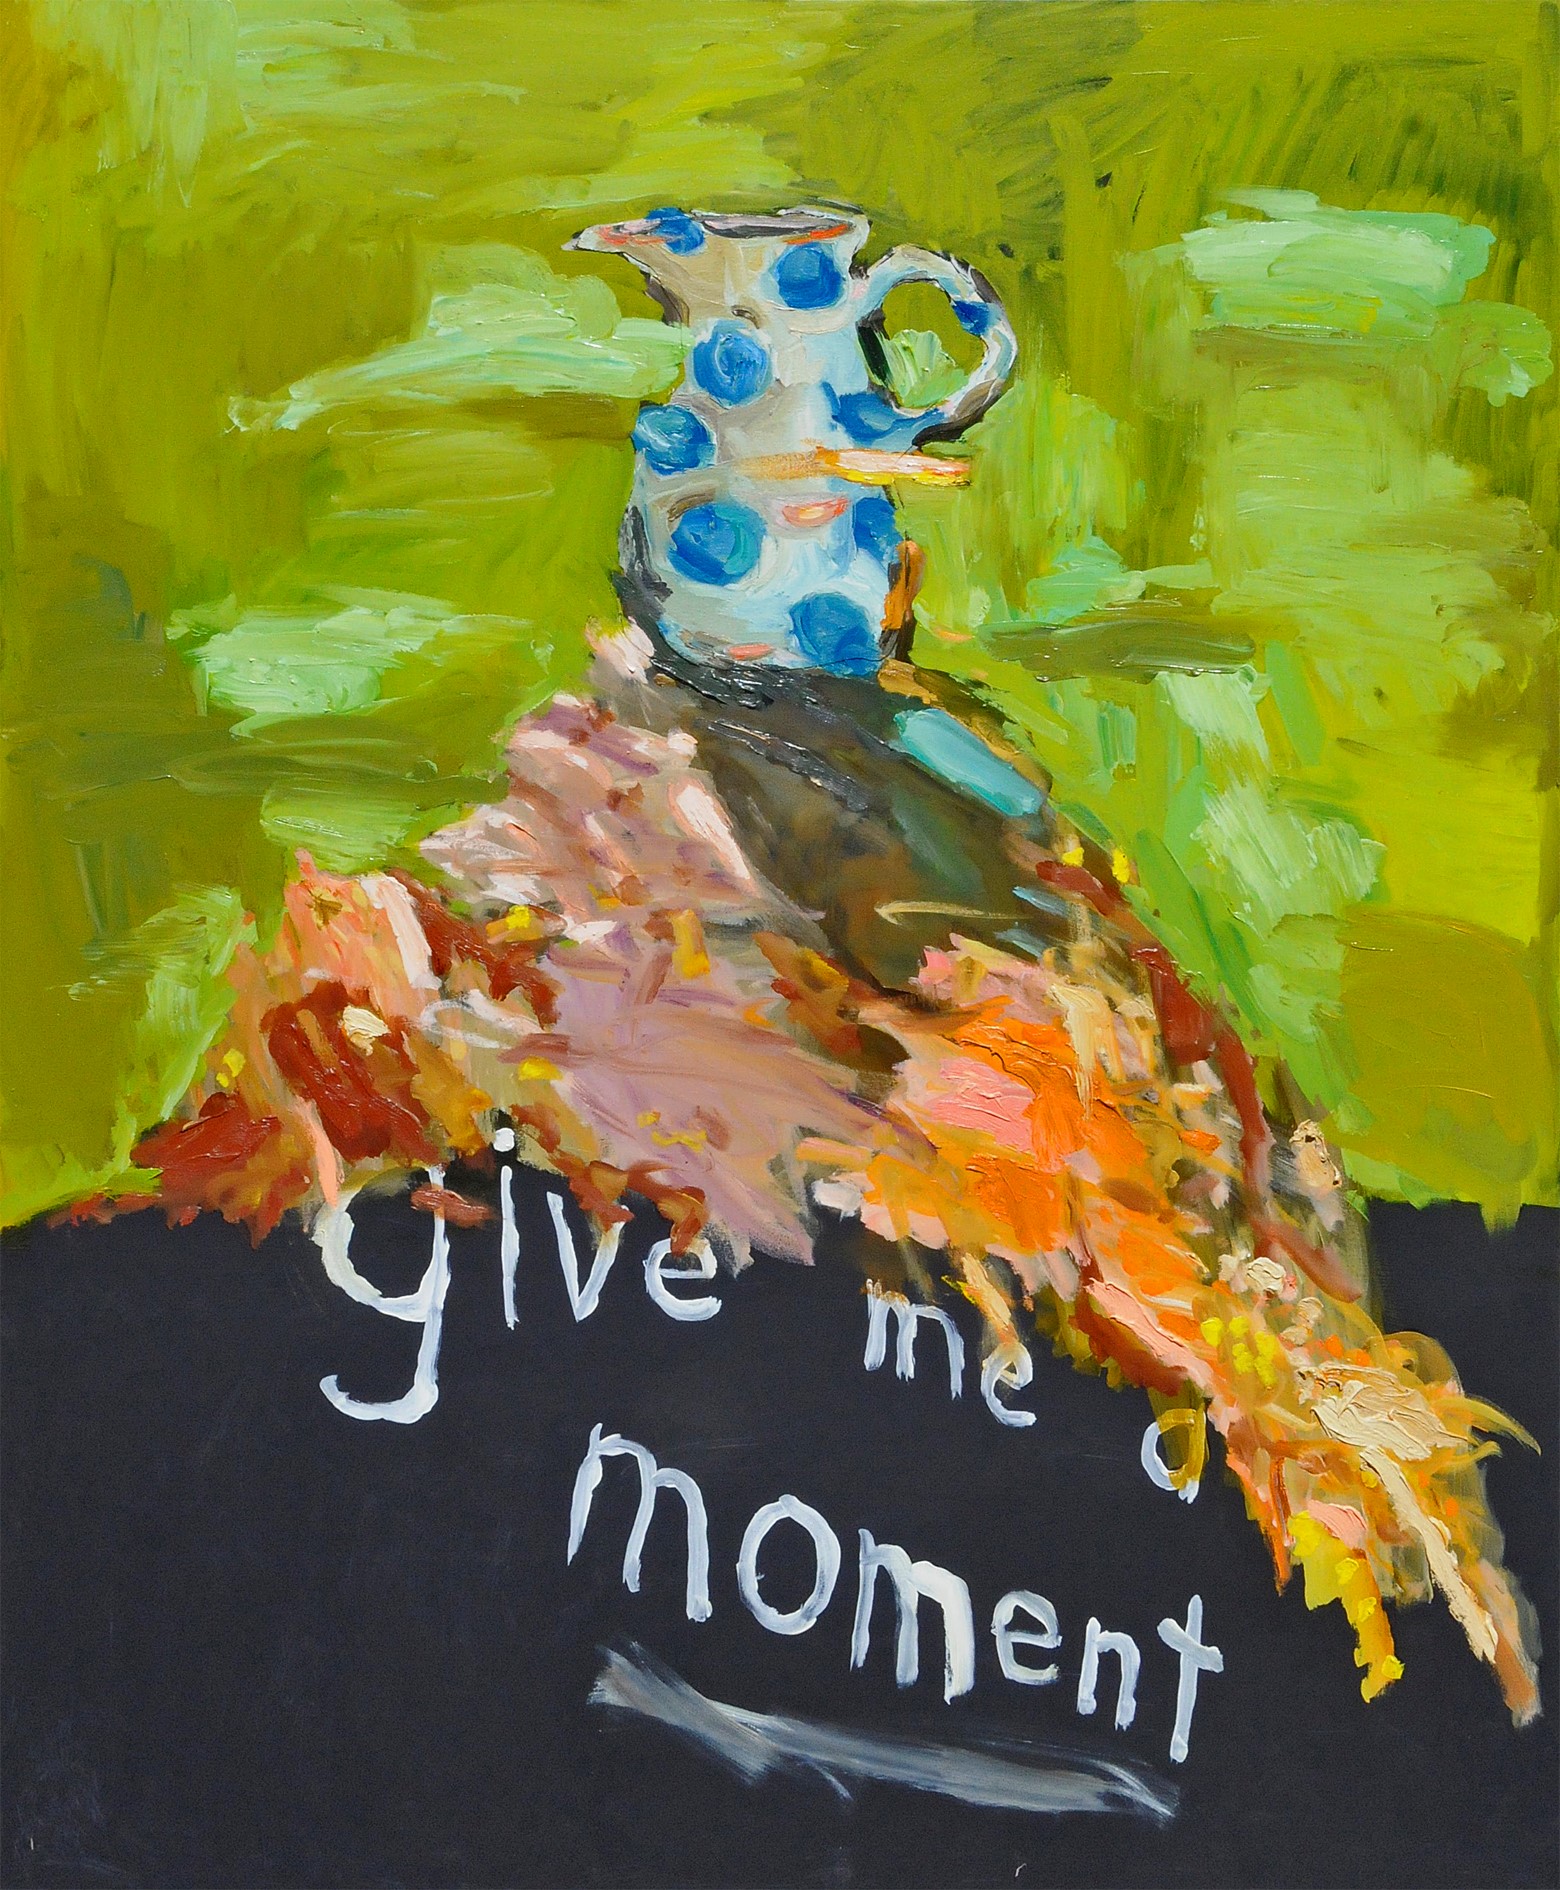 Carroll - Give Me a Moment - oil and acrylic on canvas - 152.5 x 121.5cm - email